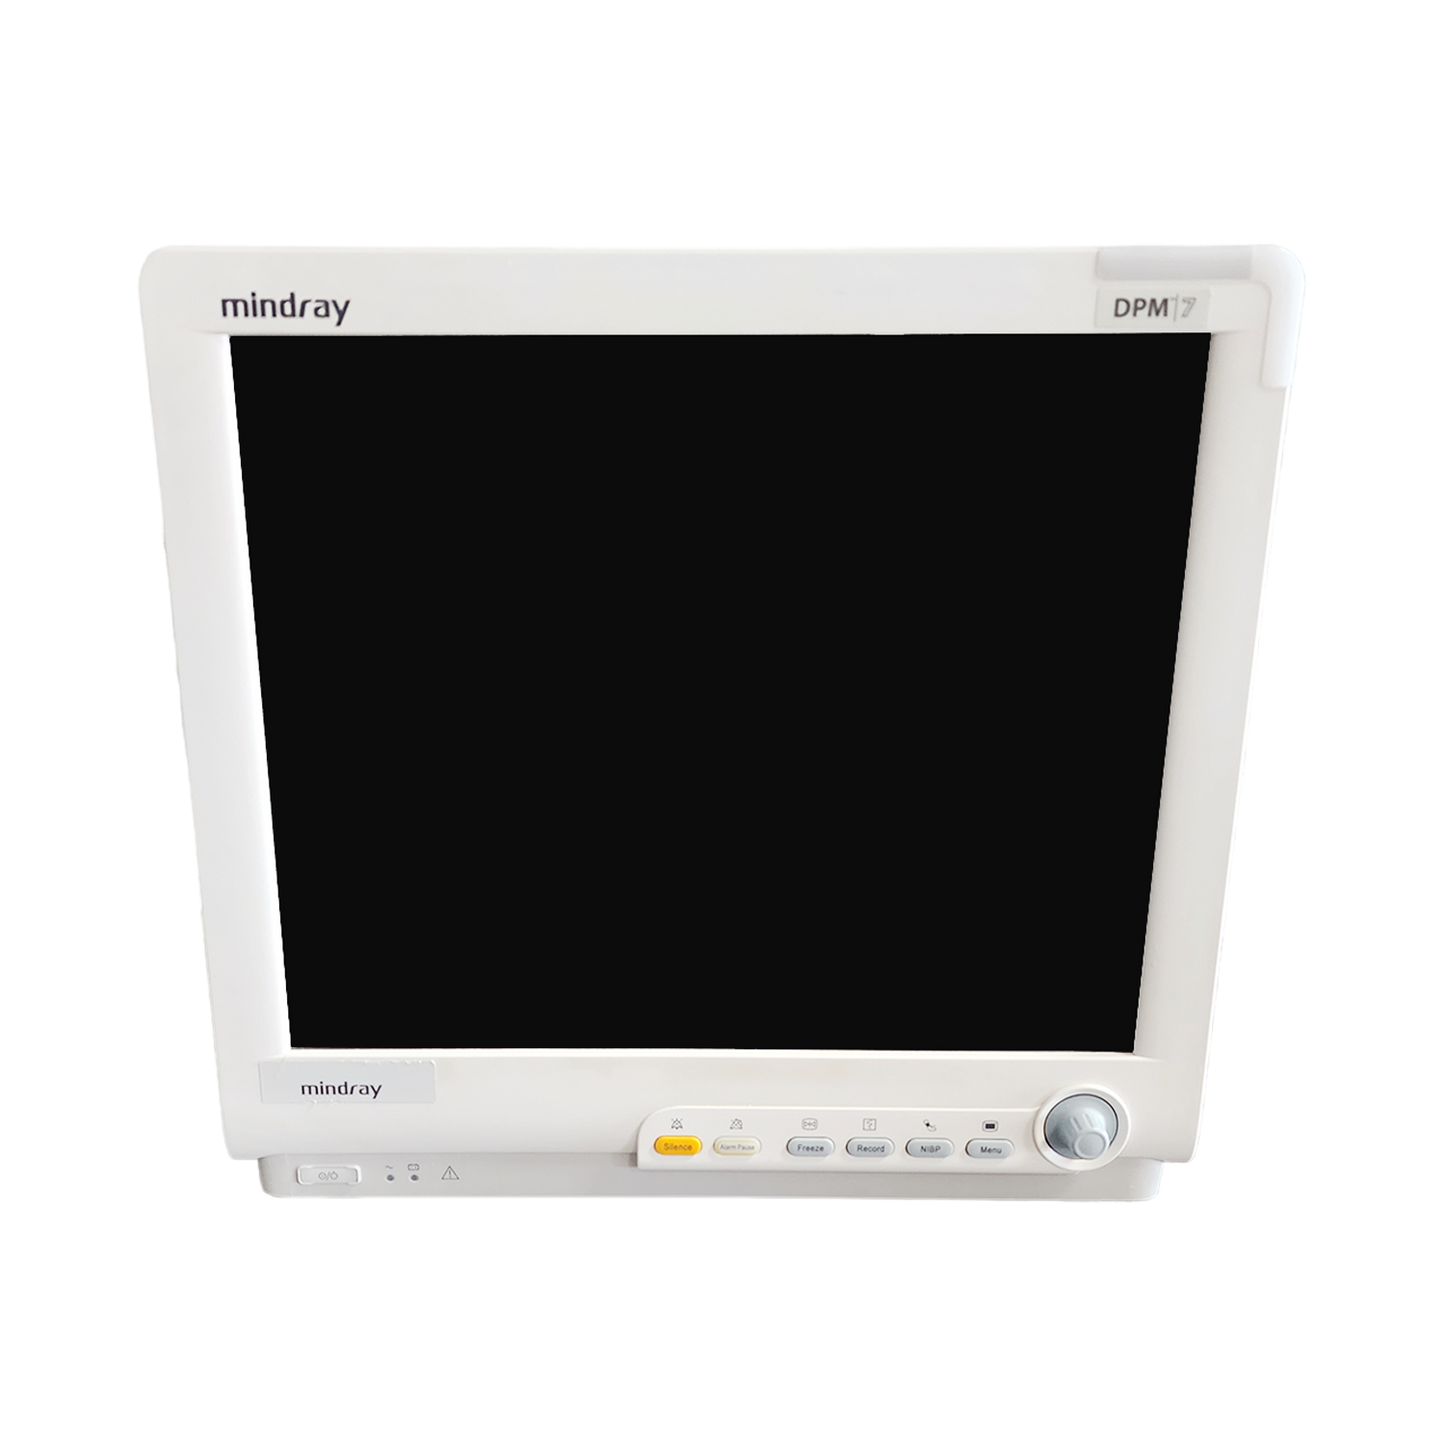 Mindray/Datascope DPM7 Patient Monitor